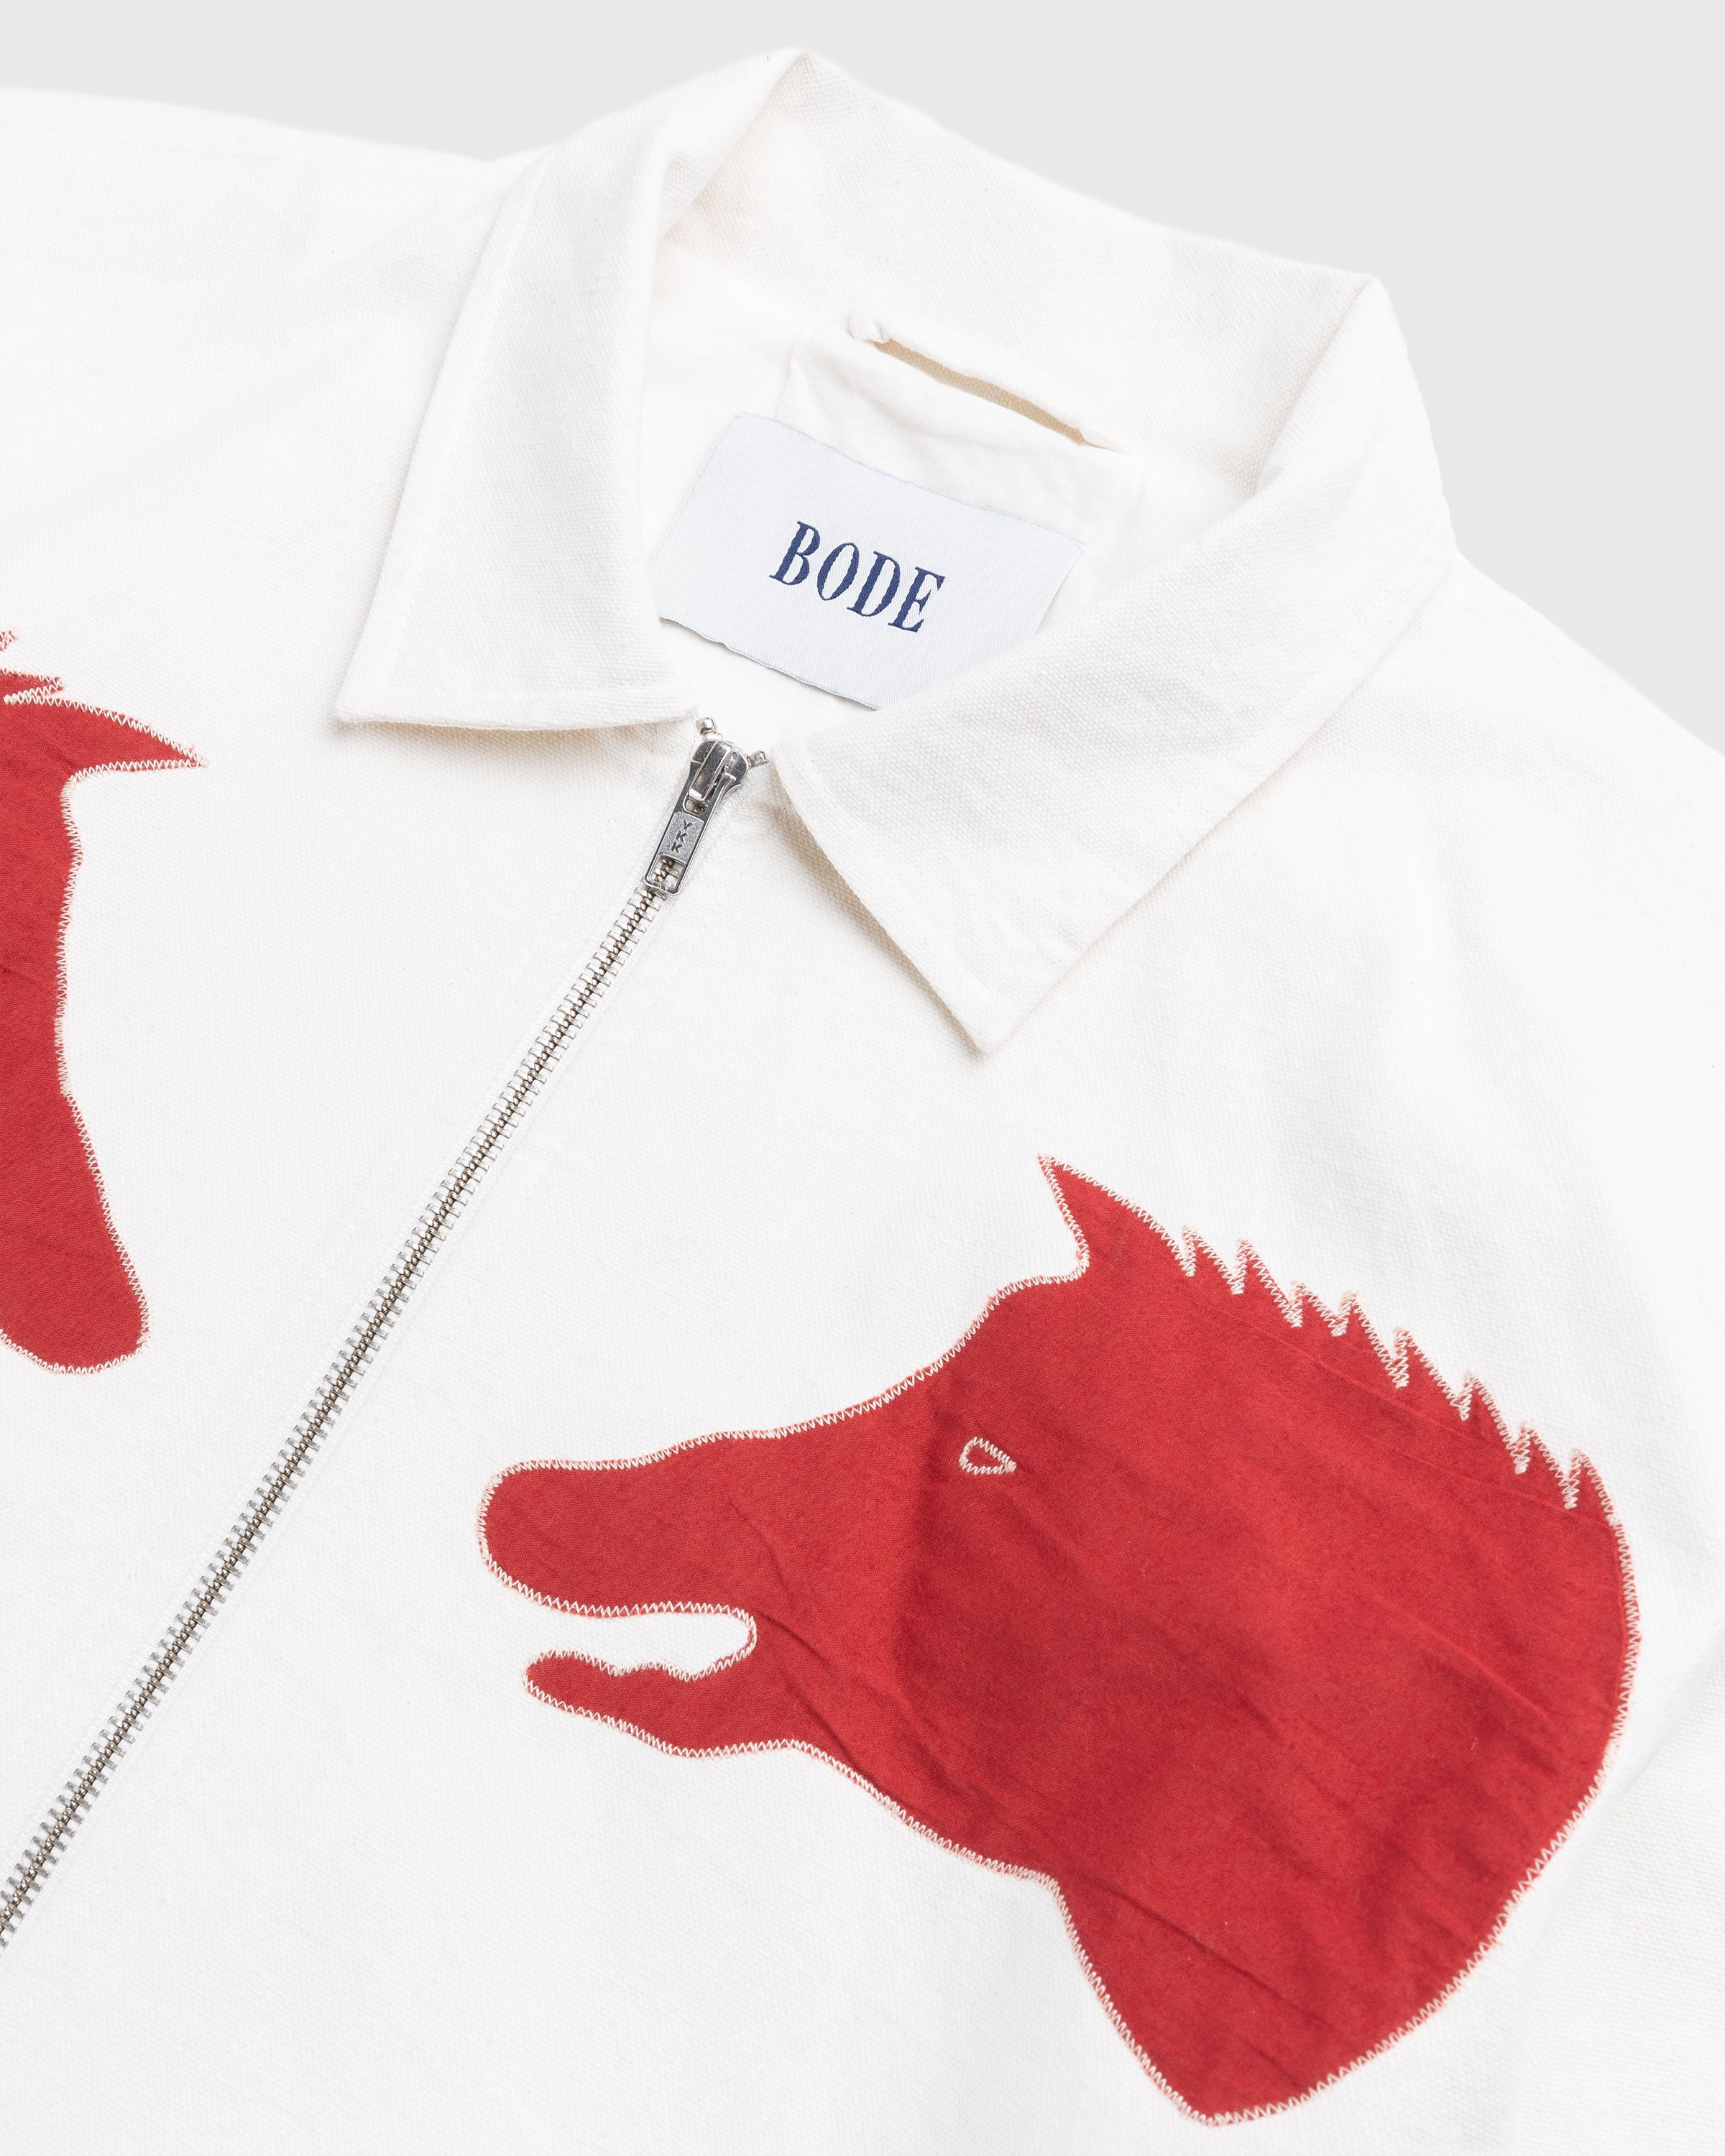 Bode - Boar Applique Jacket White/Red - Clothing - White - Image 2